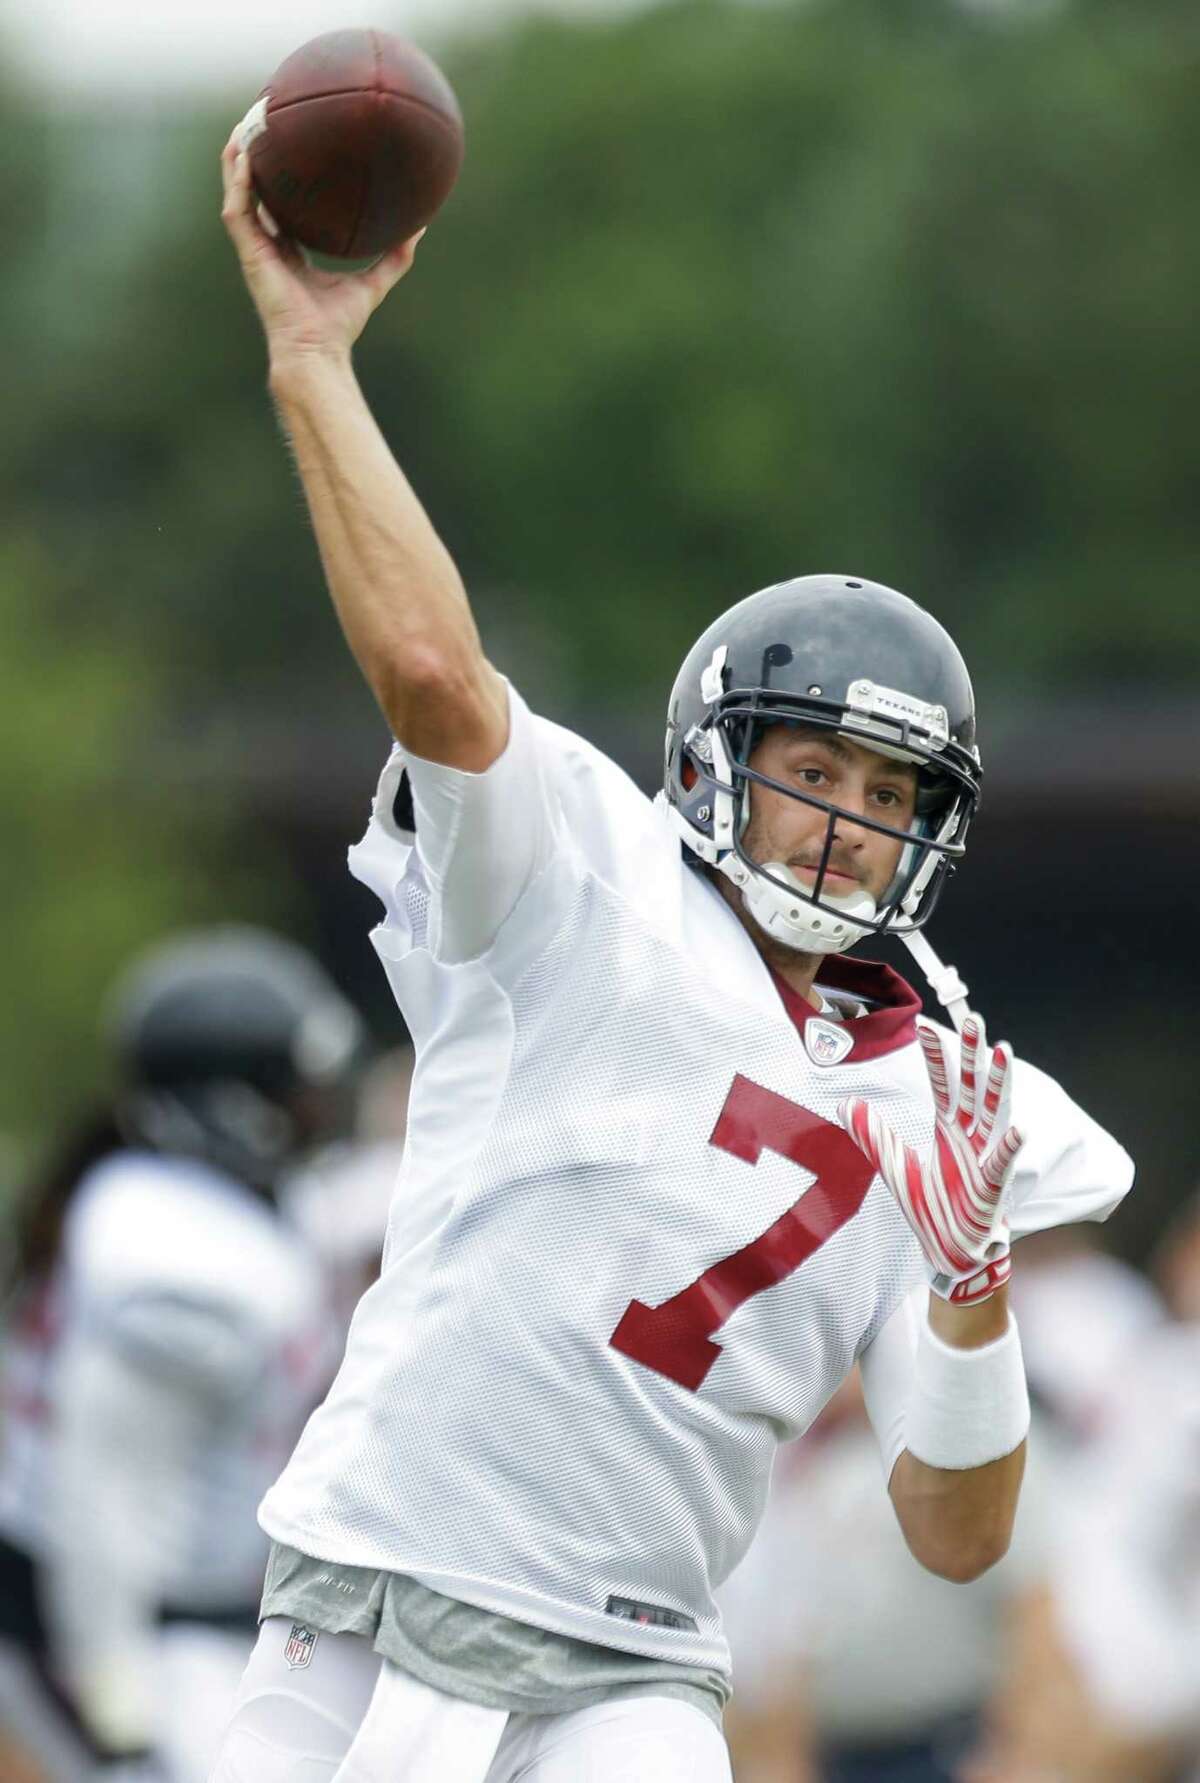 Houston Texans quarterback Brian Hoyer throws a pass during Texans training camp with the Washington Redskins at the Bon Secours Training Center on Thursday, Aug. 6, 2015, in Richmond, Va.